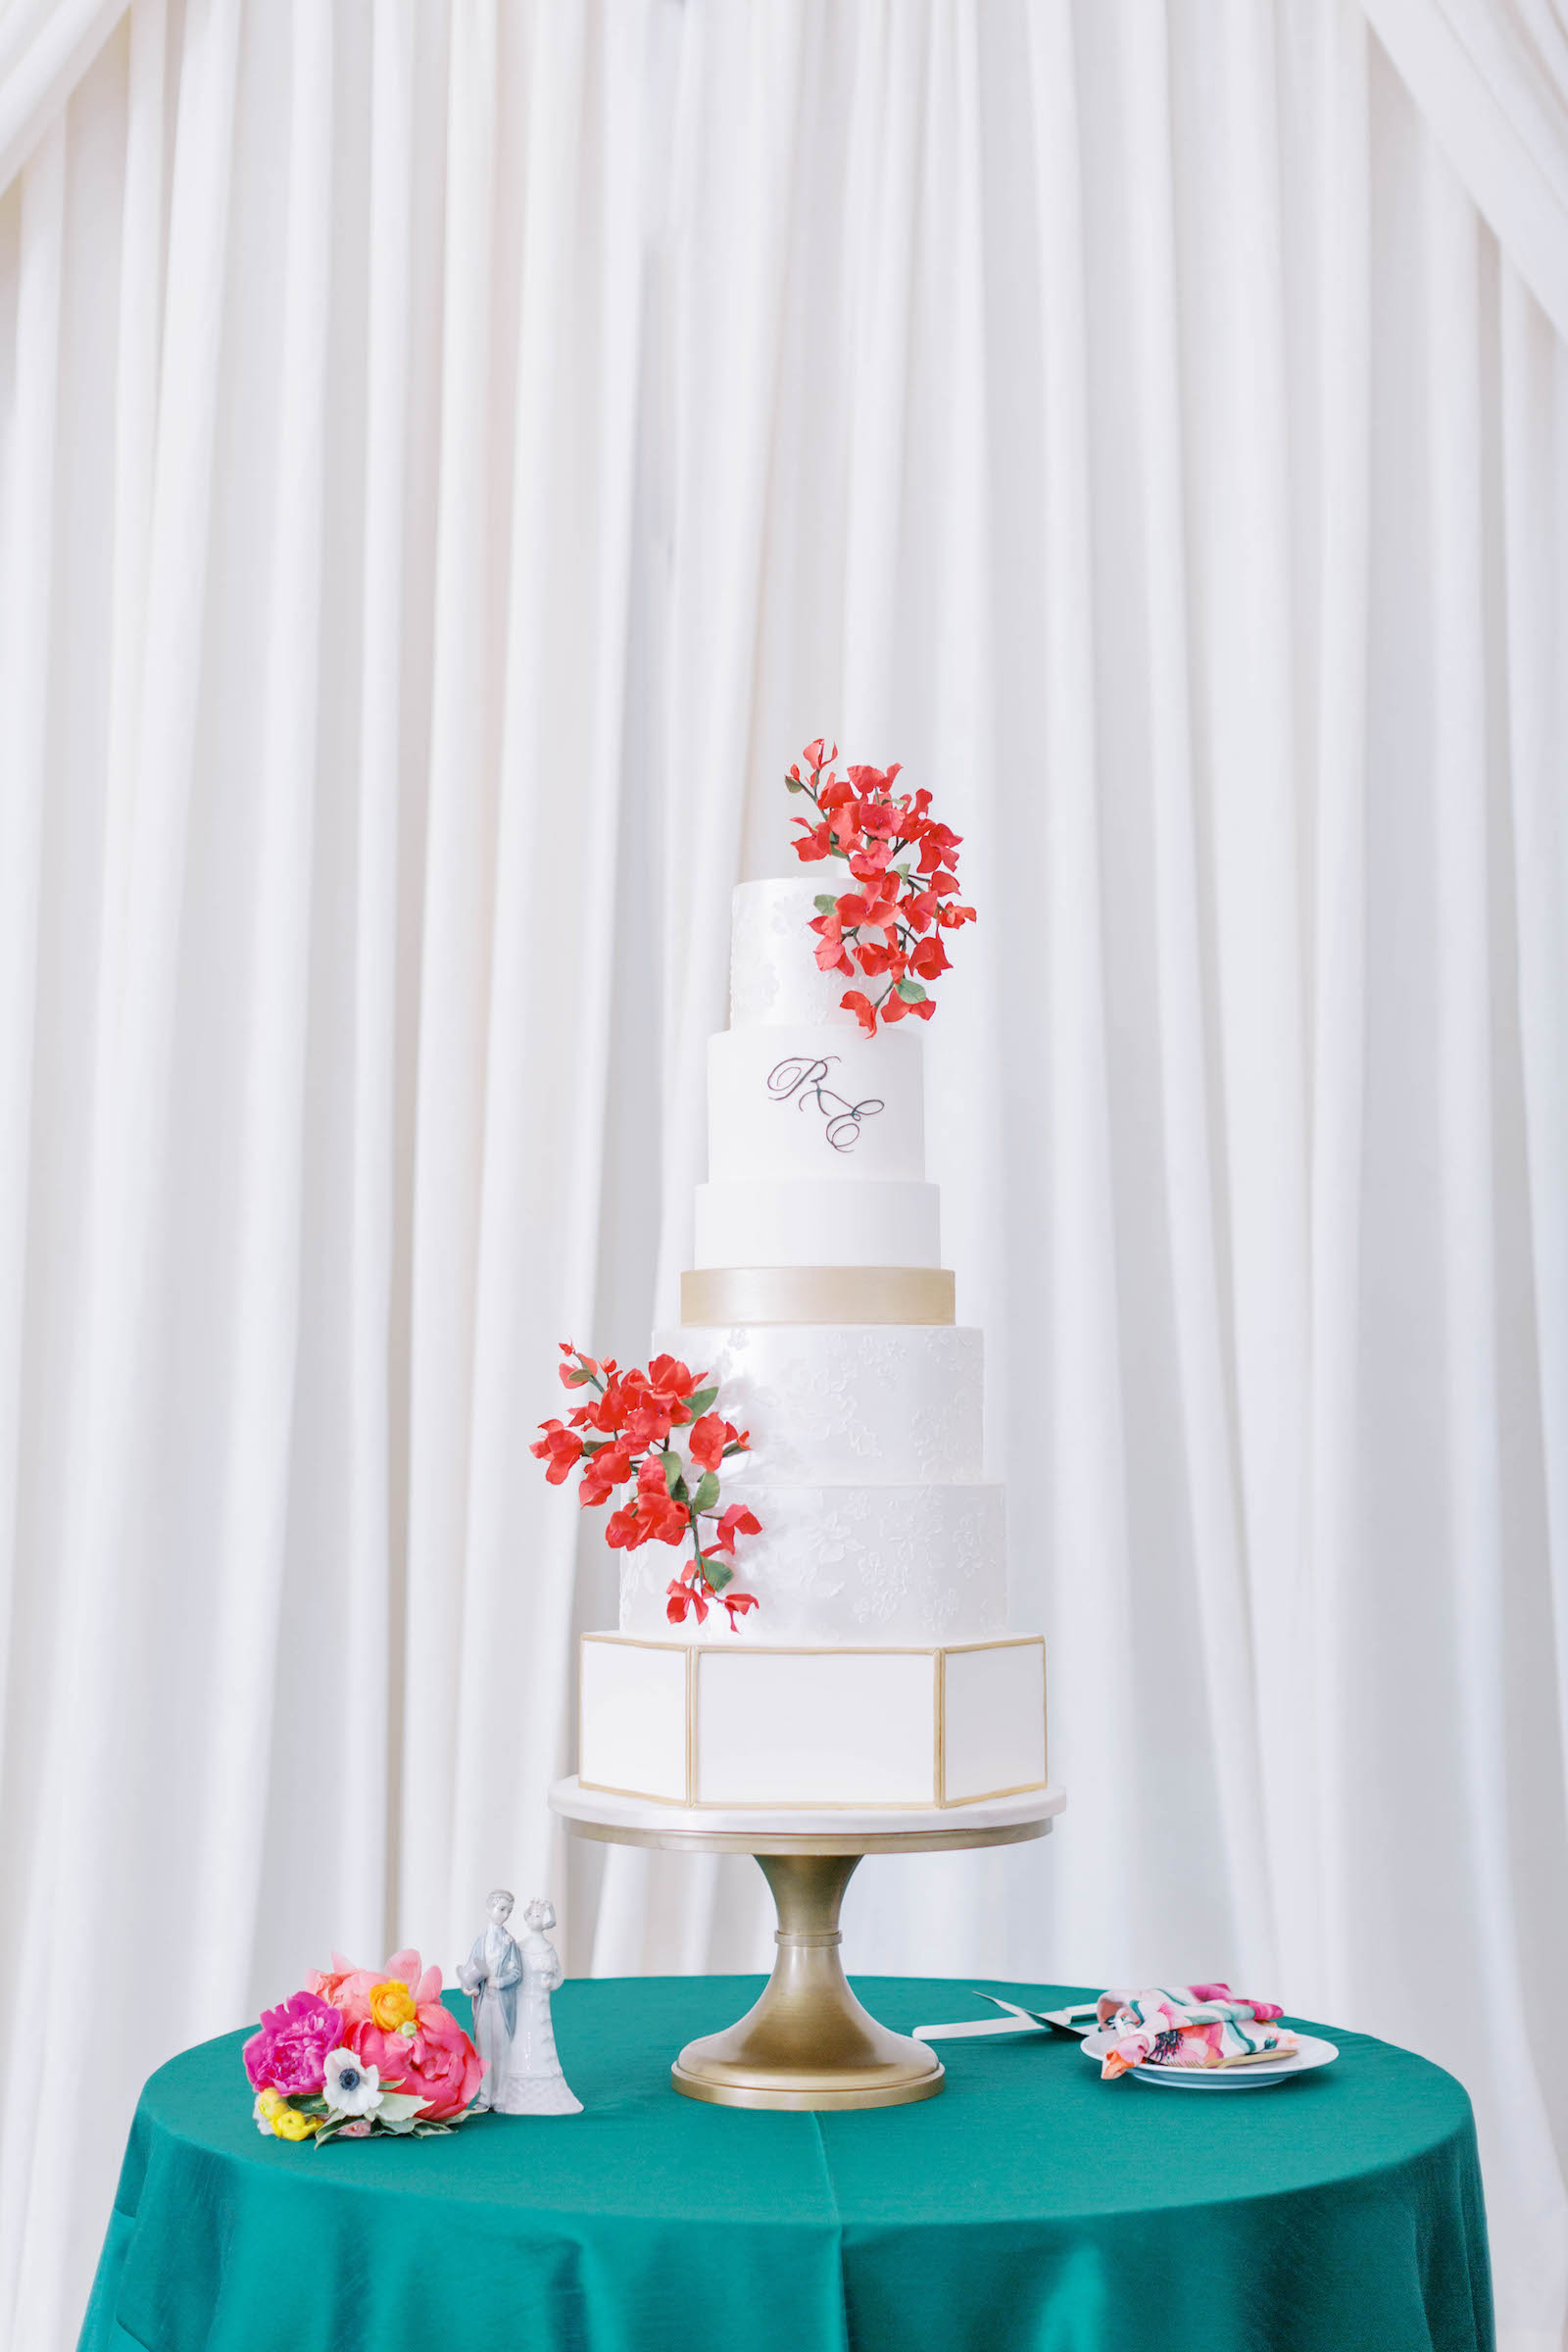 Six Tier White Wedding Cake with Gold Accent Details and Hot Pink Florals